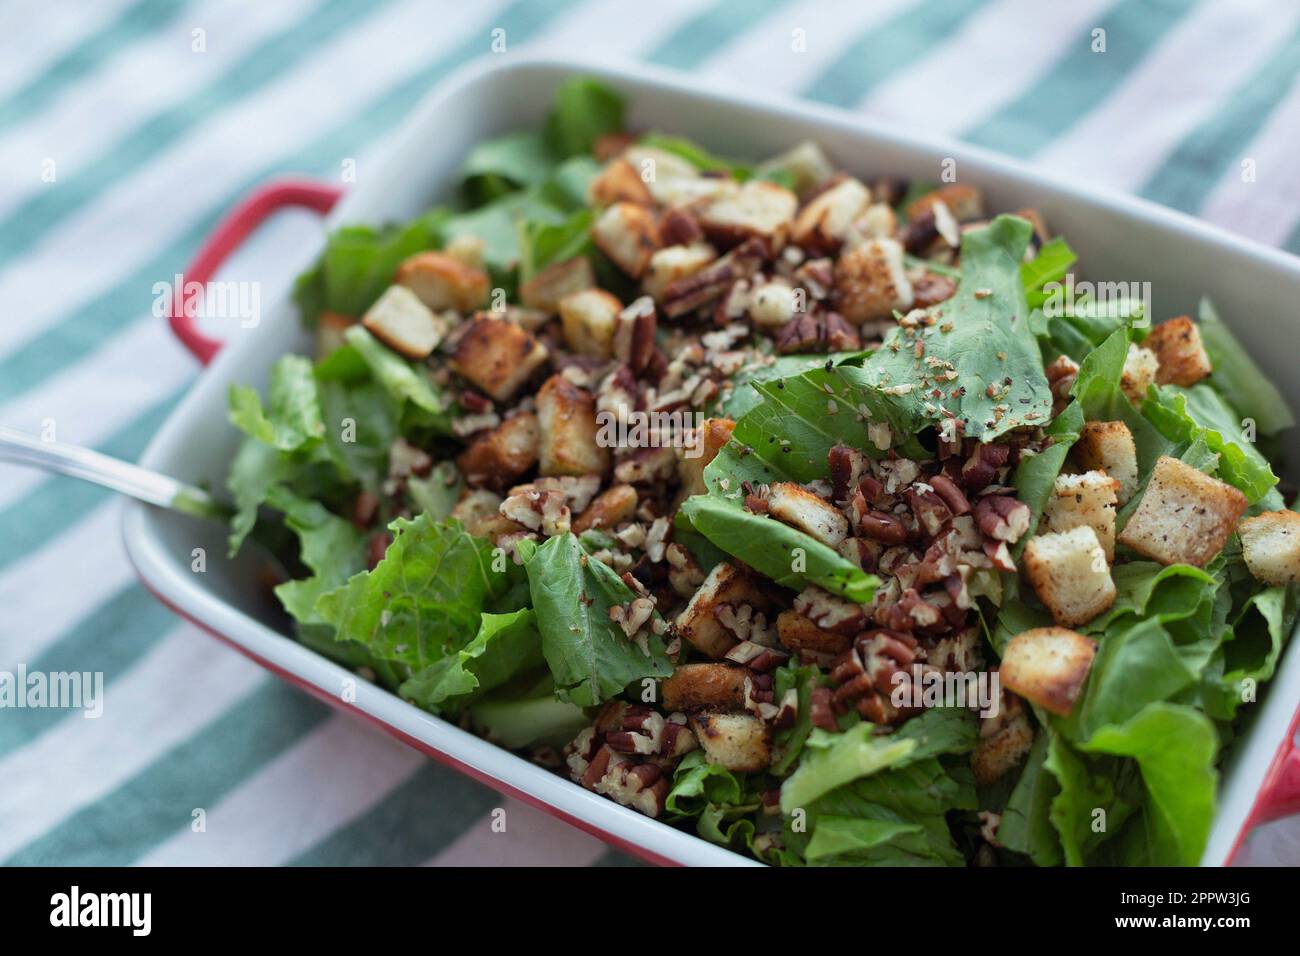 Still life close up healthy, fresh salad with walnuts and croutons Stock Photo